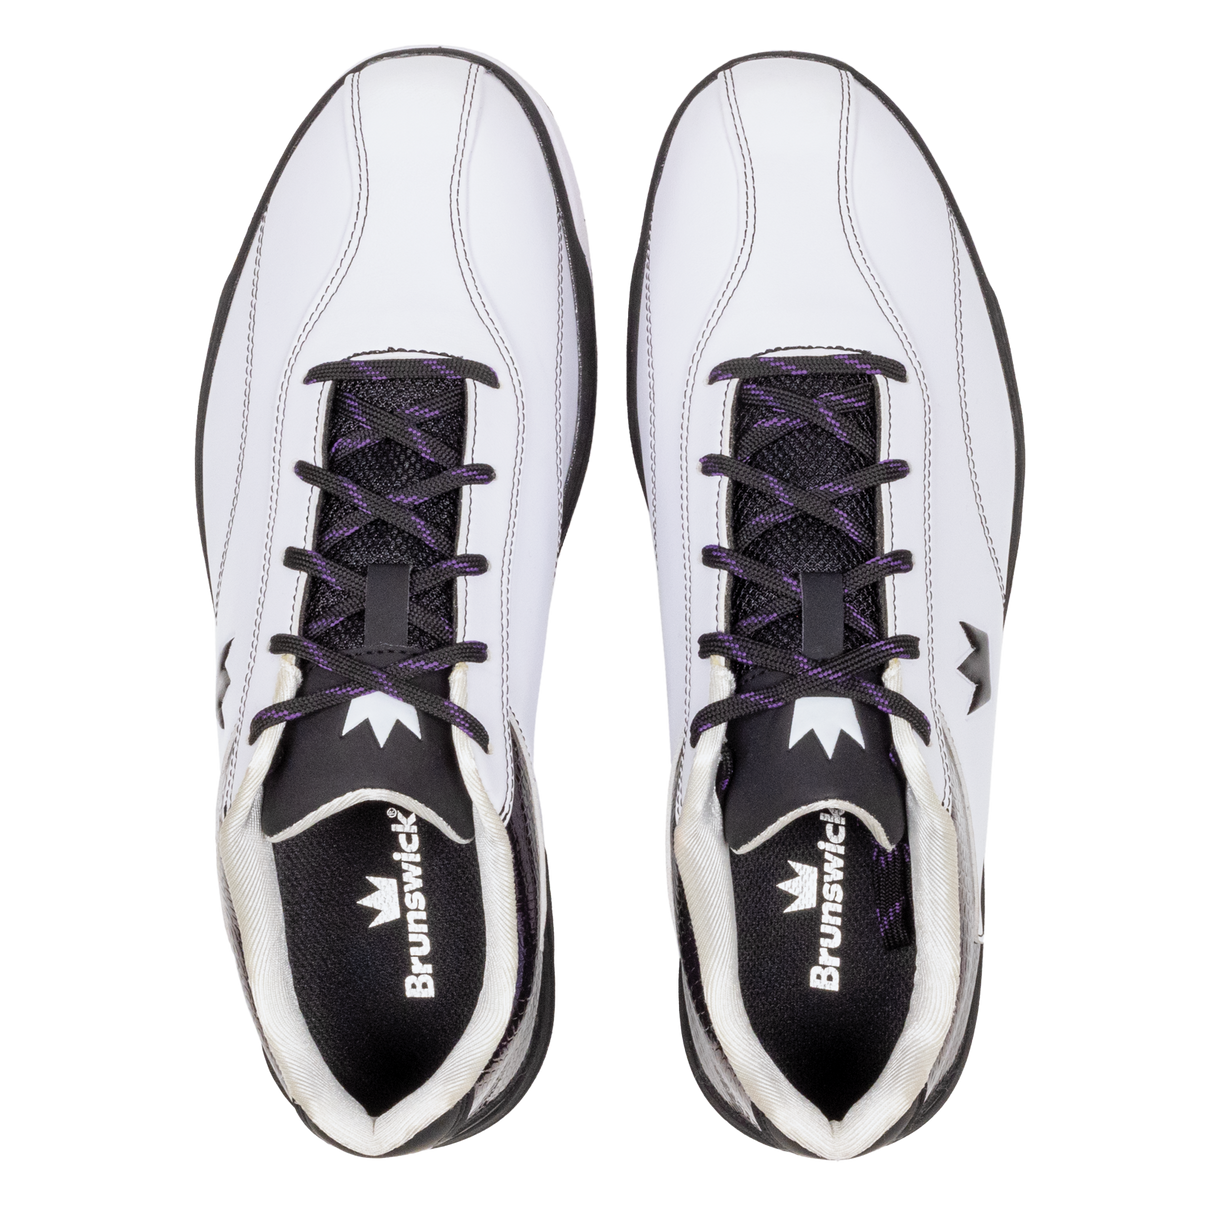 Brunswick Legacy Women's Bowling Shoes * Performance synthetic uppers * Customizable Slide Sole technology * Multi zone push away rubber * Molded EVA midsole for comfort * Includes: #4, #6, and #8 Slide Soles * Progressive, Ridged, and Leather Heels * Heal remover tool *  * 